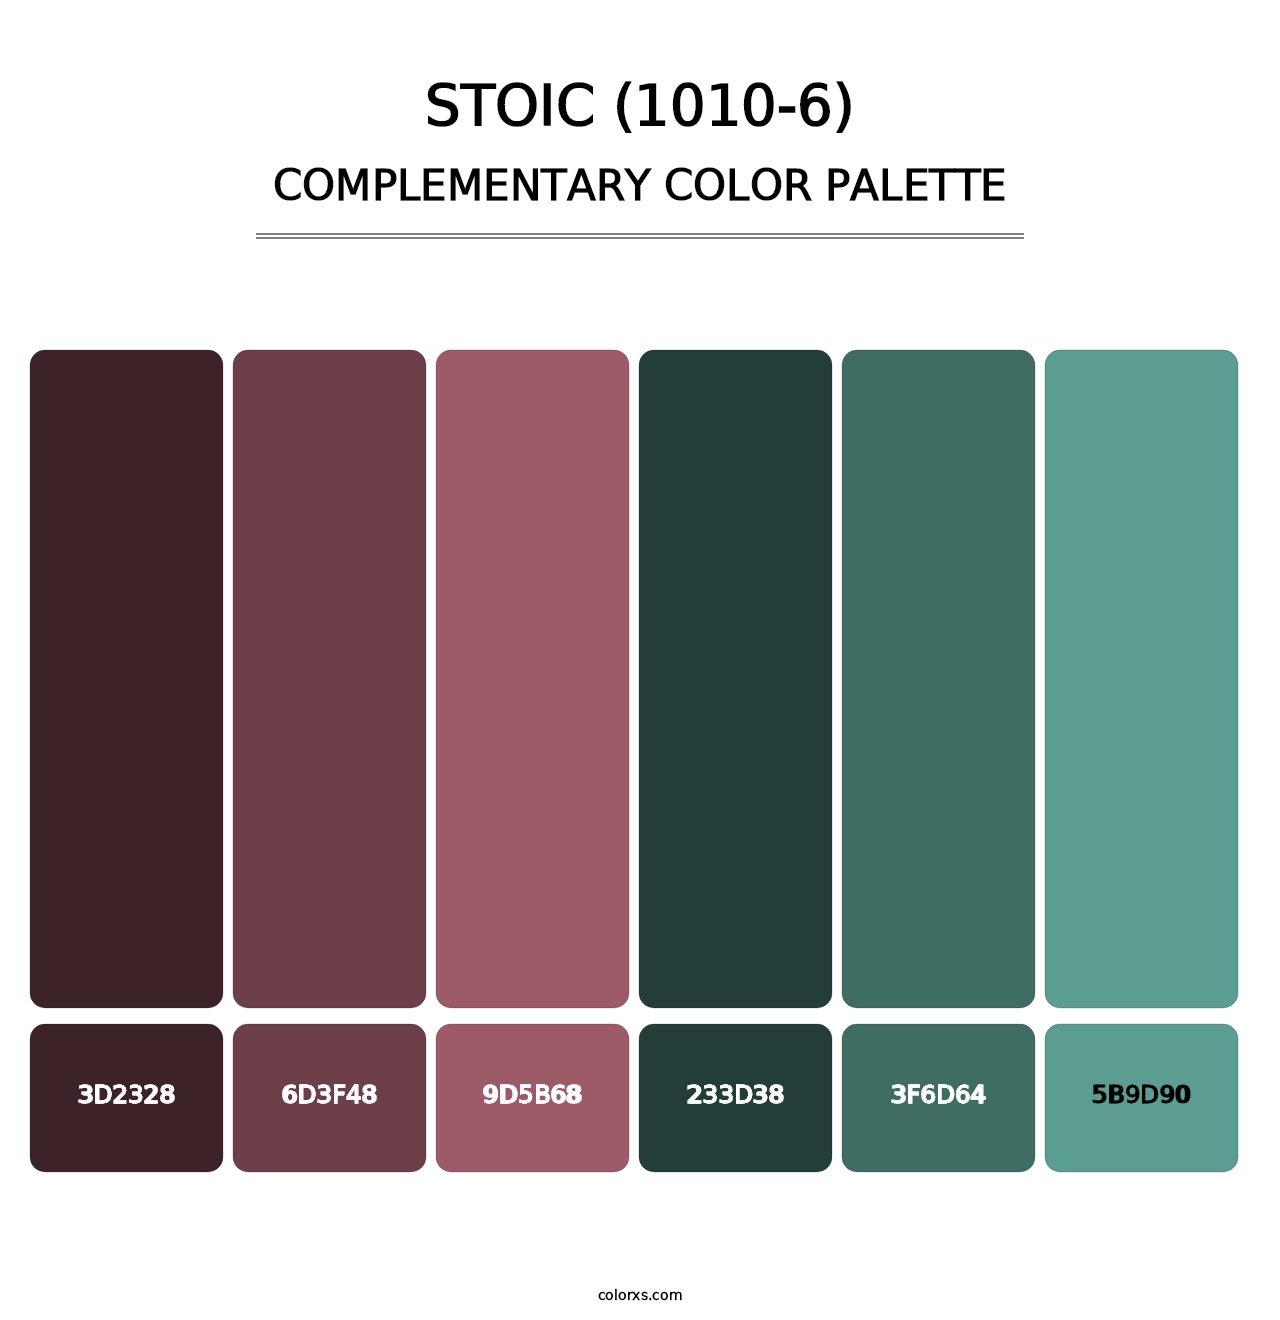 Stoic (1010-6) - Complementary Color Palette